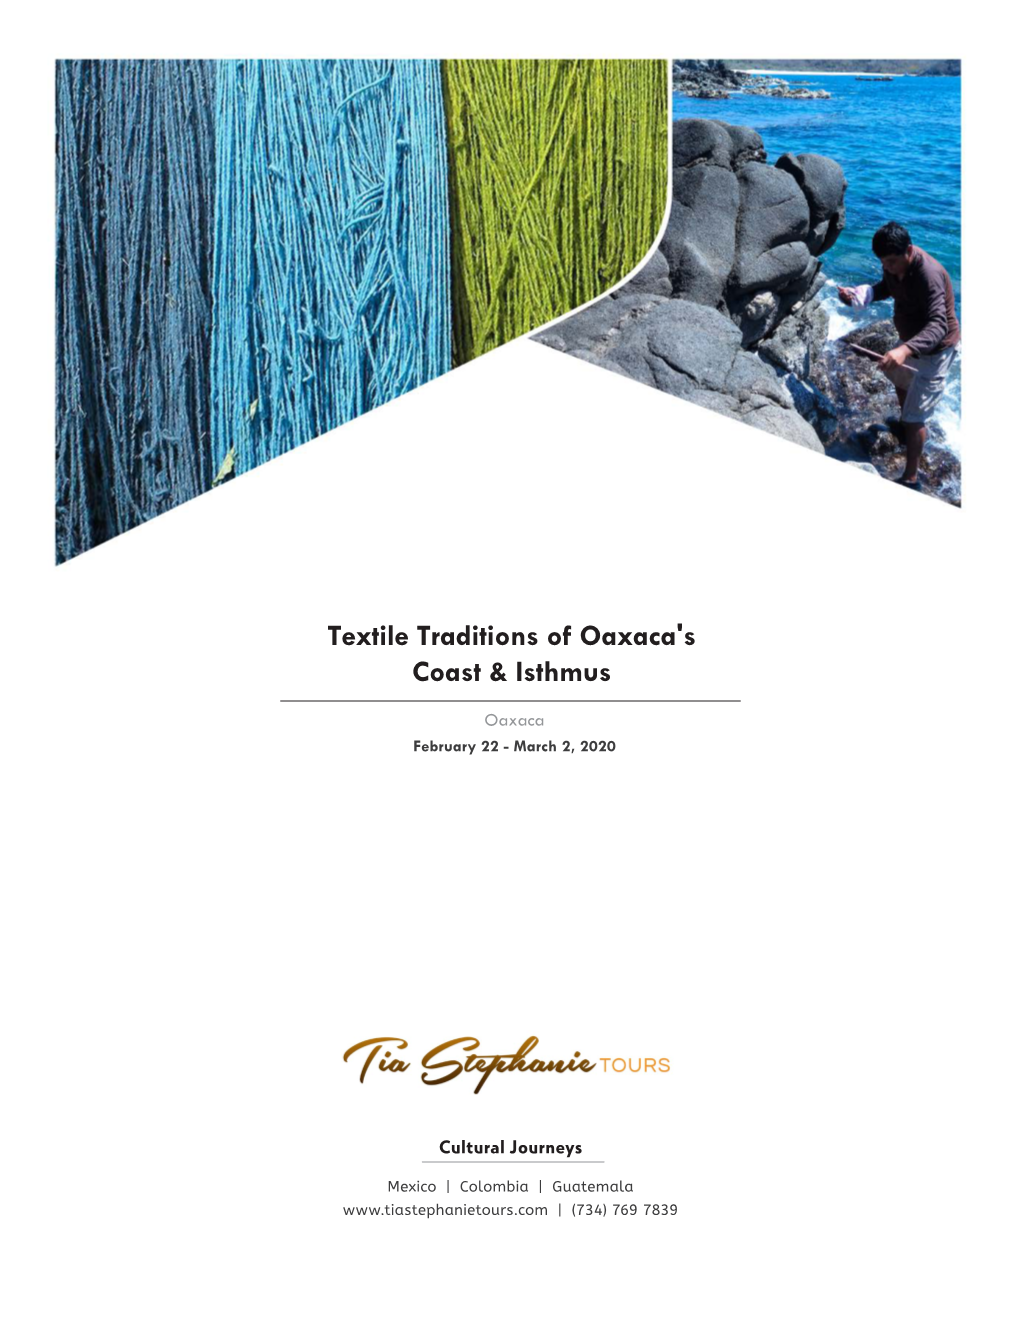 Textile Traditions of Oaxaca's Coast & Isthmus